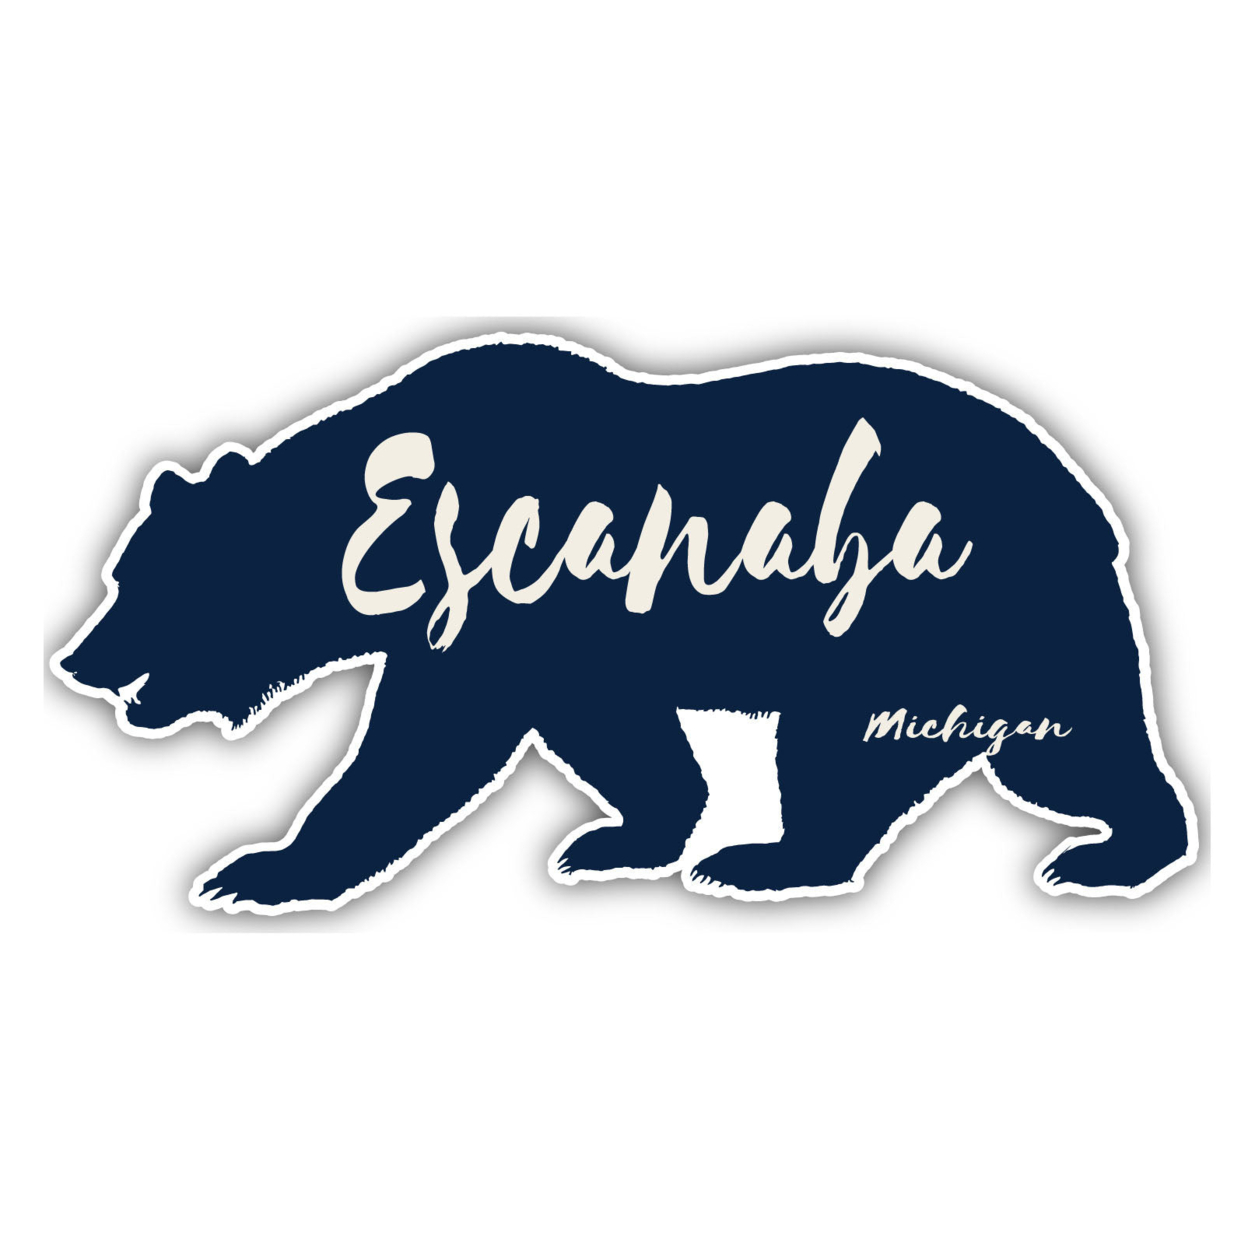 Escanaba Michigan Souvenir Decorative Stickers (Choose Theme And Size) - 4-Pack, 8-Inch, Bear